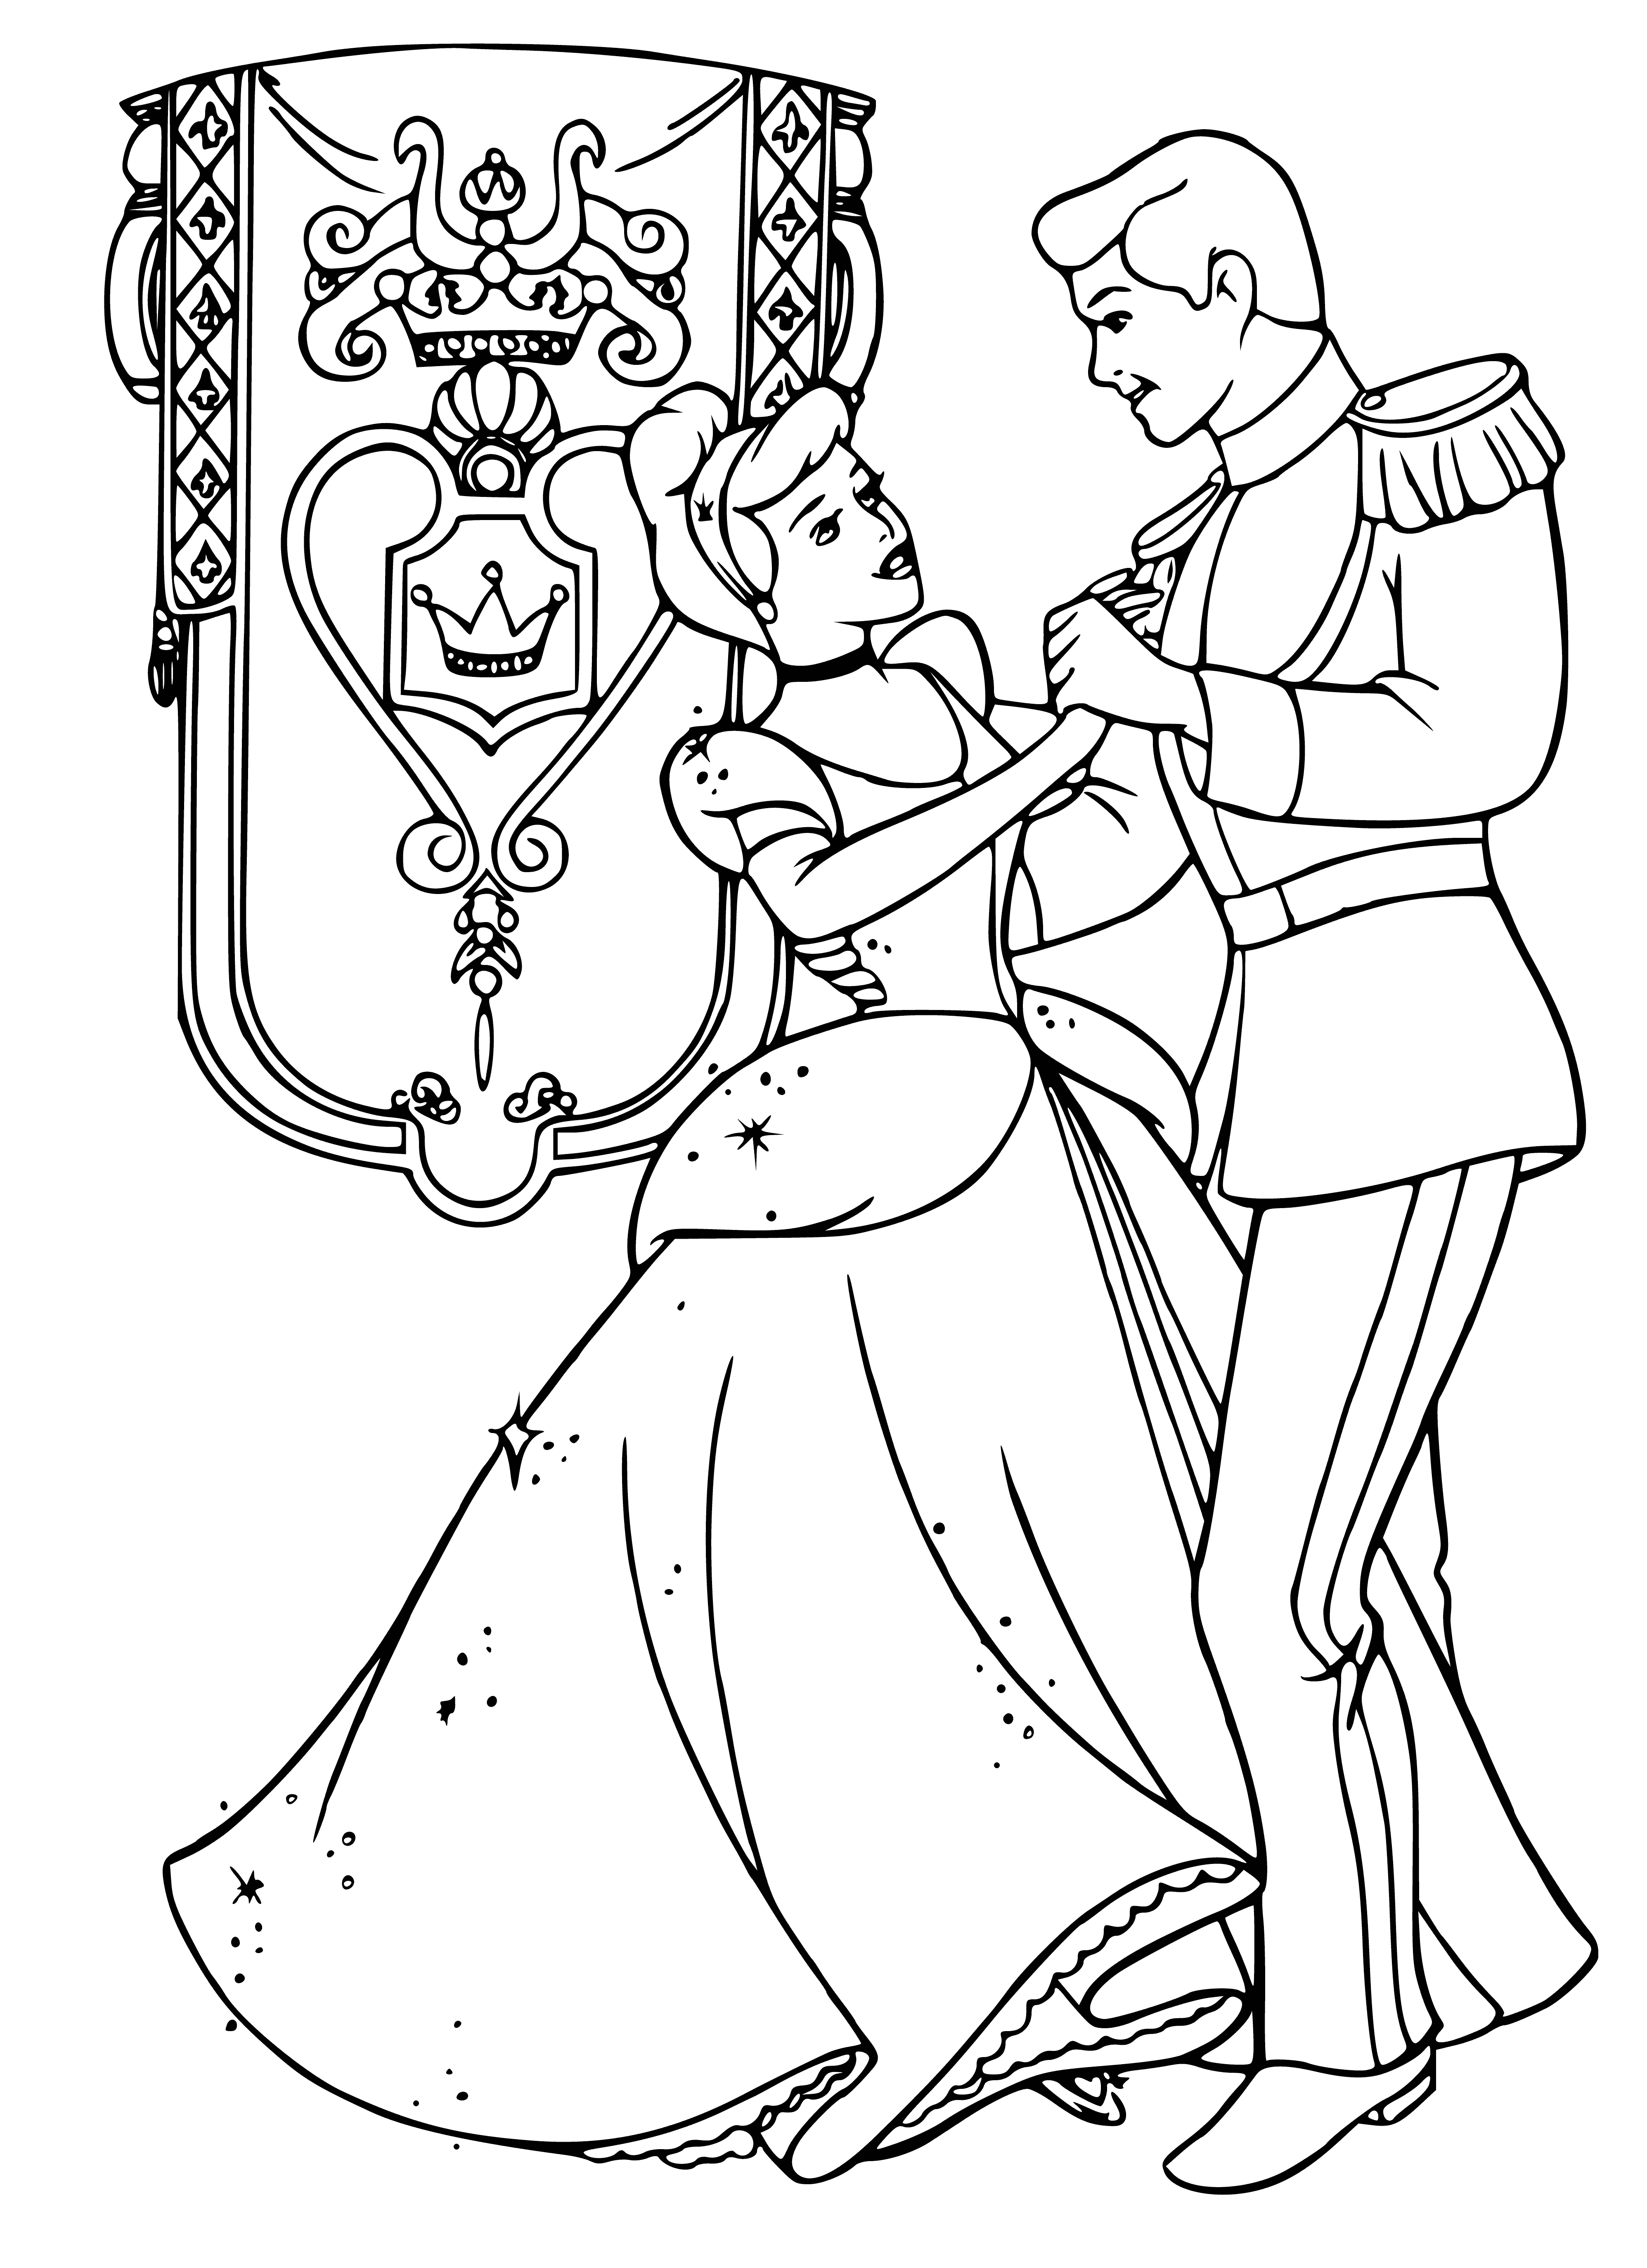 coloring page: Cinderella twirls gracefully in a beautiful gown as the prince looks on lovingly. They are in their own world in a sumptuous ballroom.